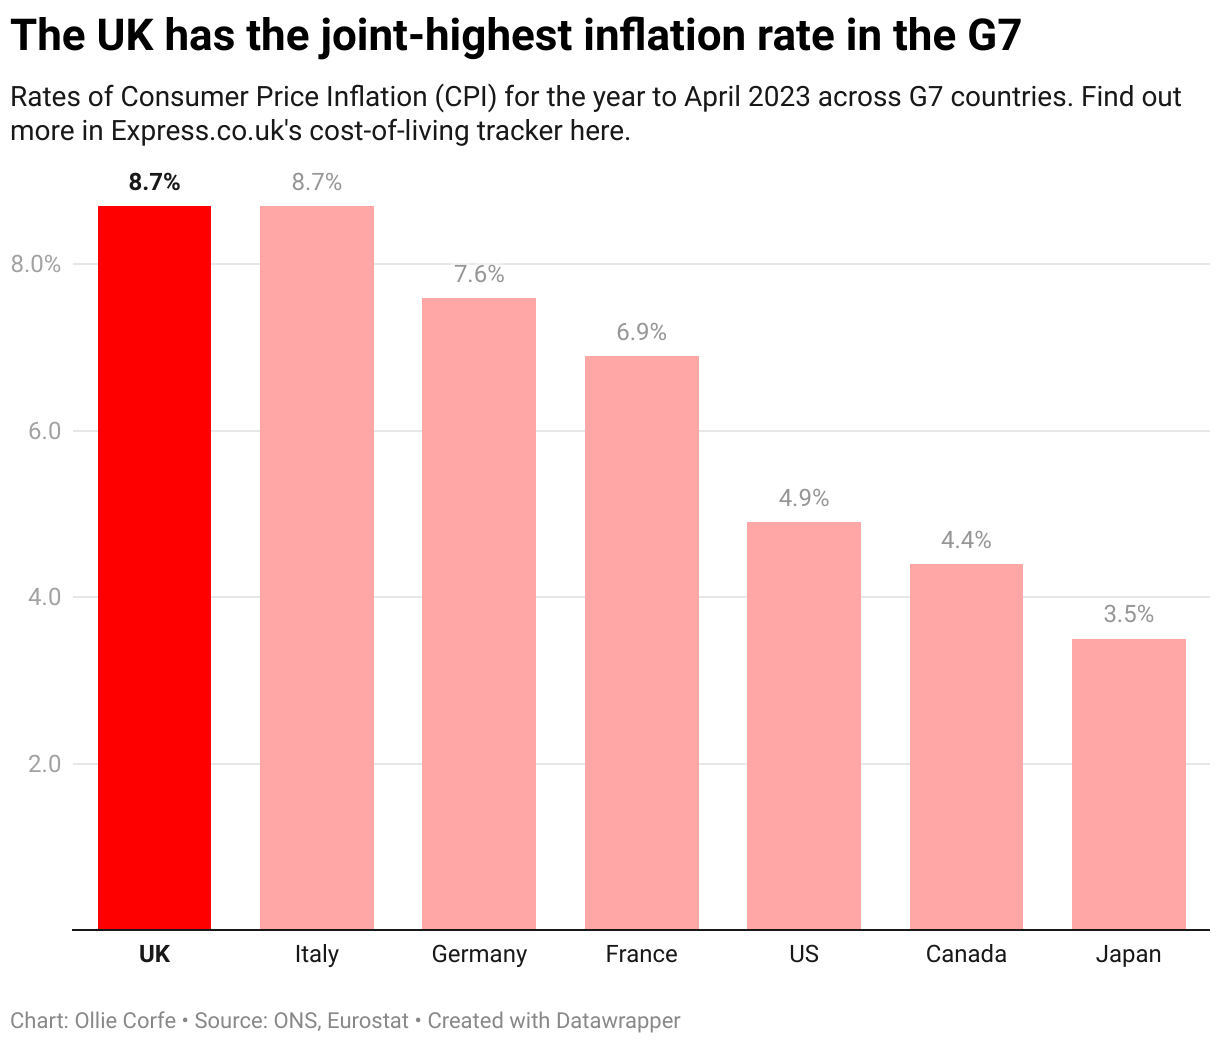 Column chart showing rates of CPI inflation across G7 countries.